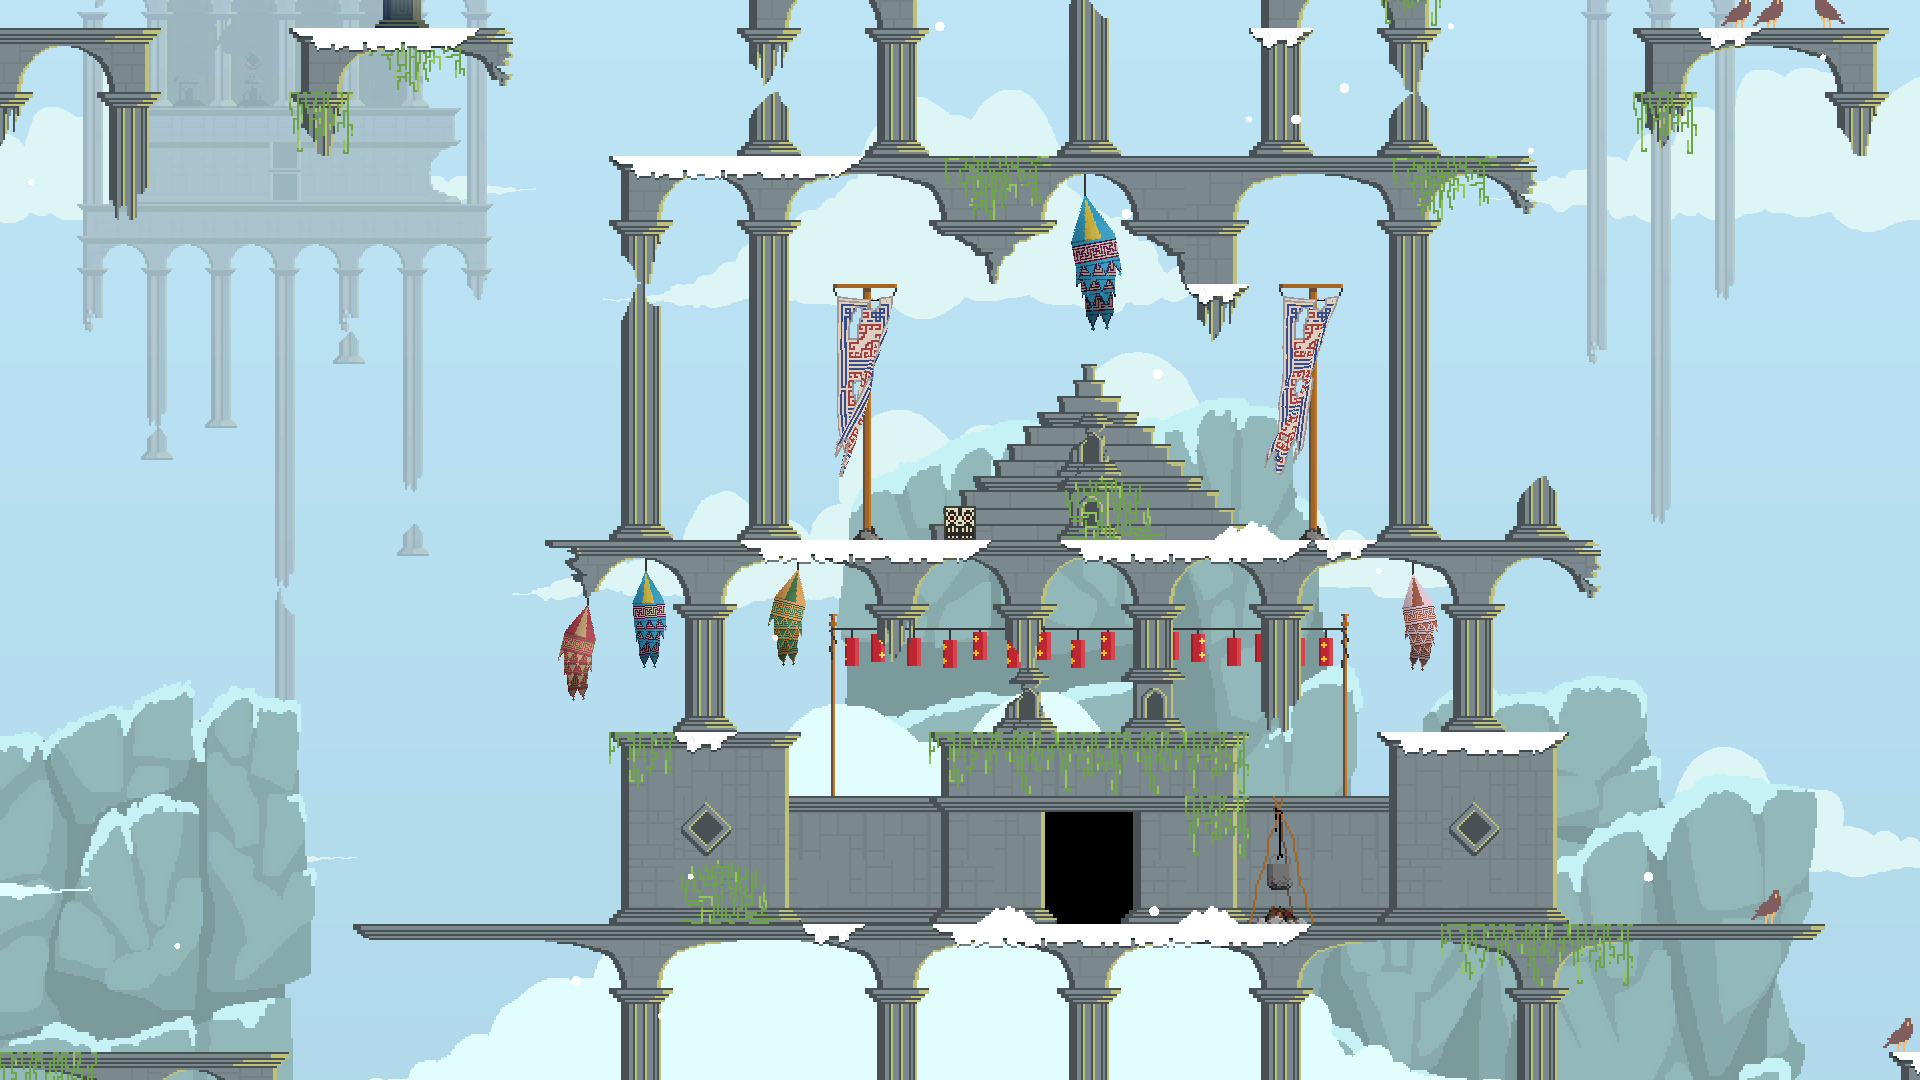 Scene from Mandagon, a video game inspired by Tibetan Buddhism